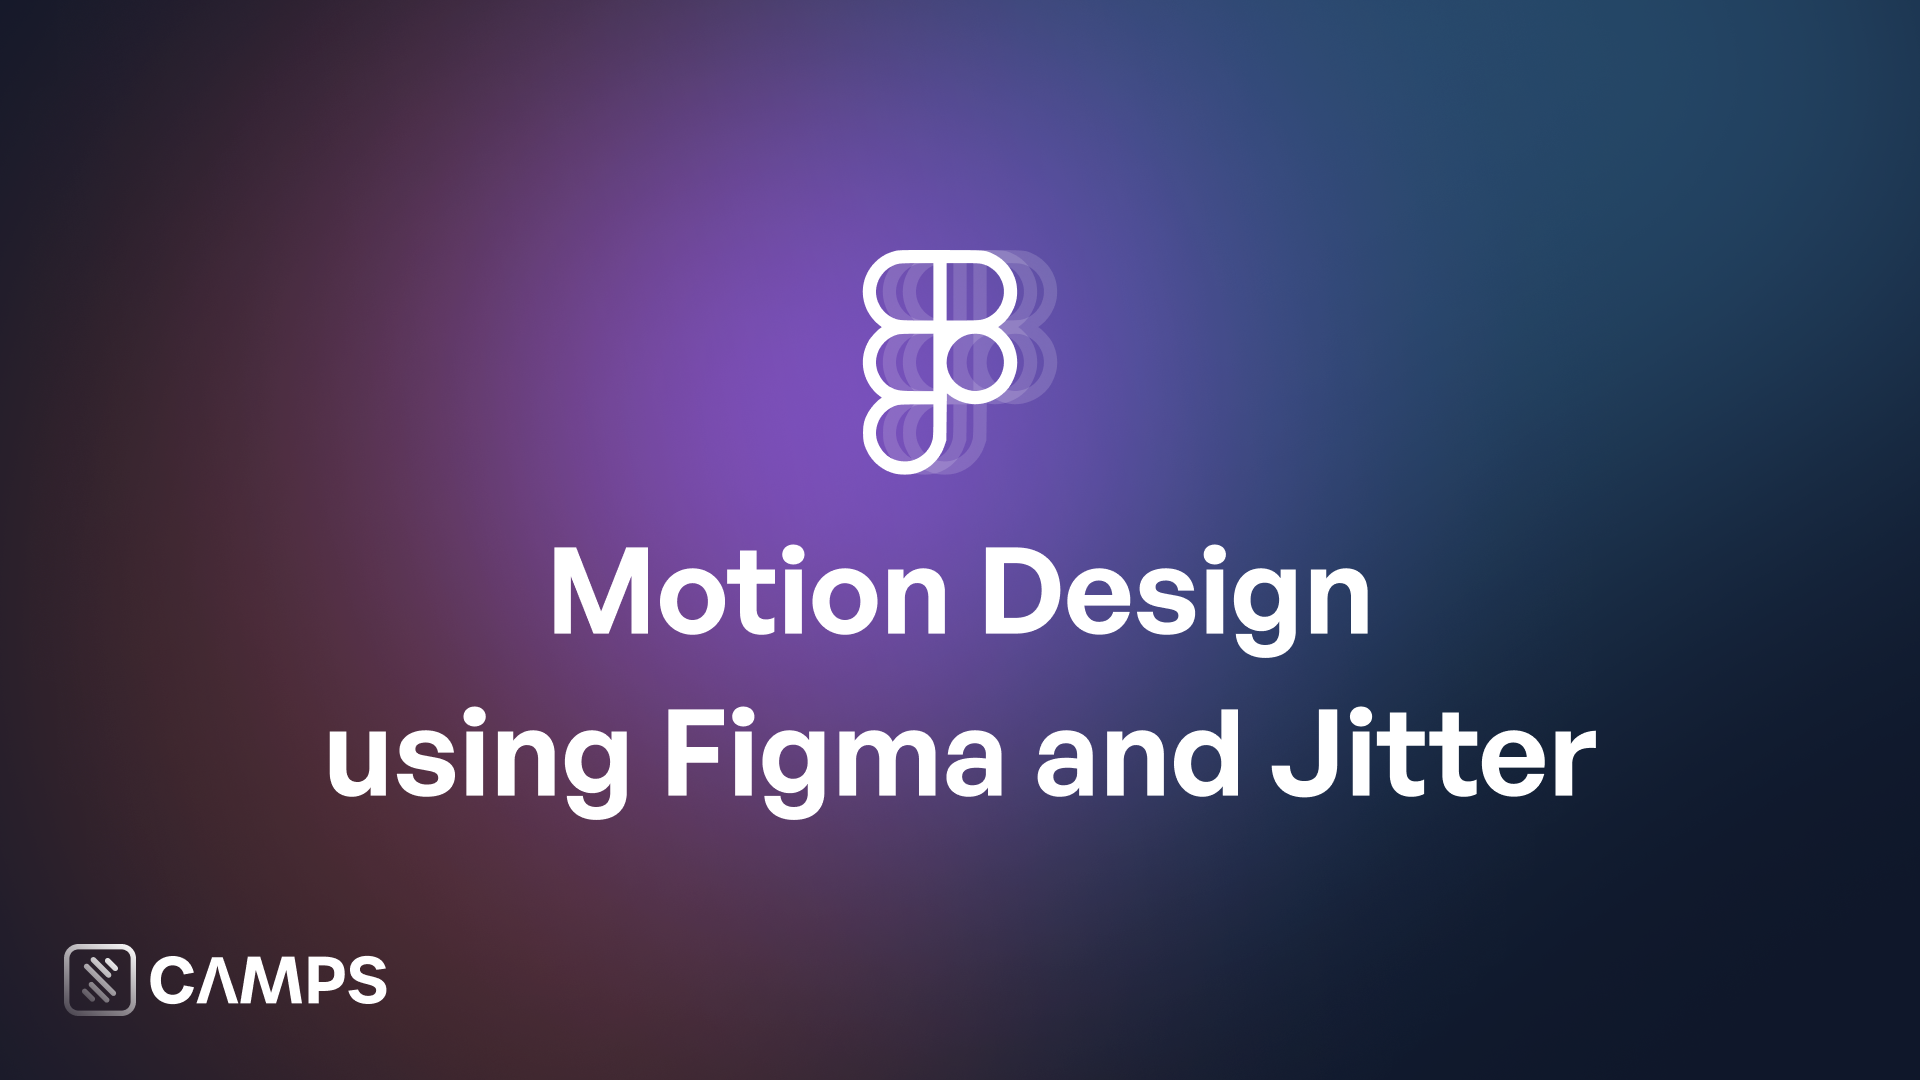 Motion Design using Figma and Jitter